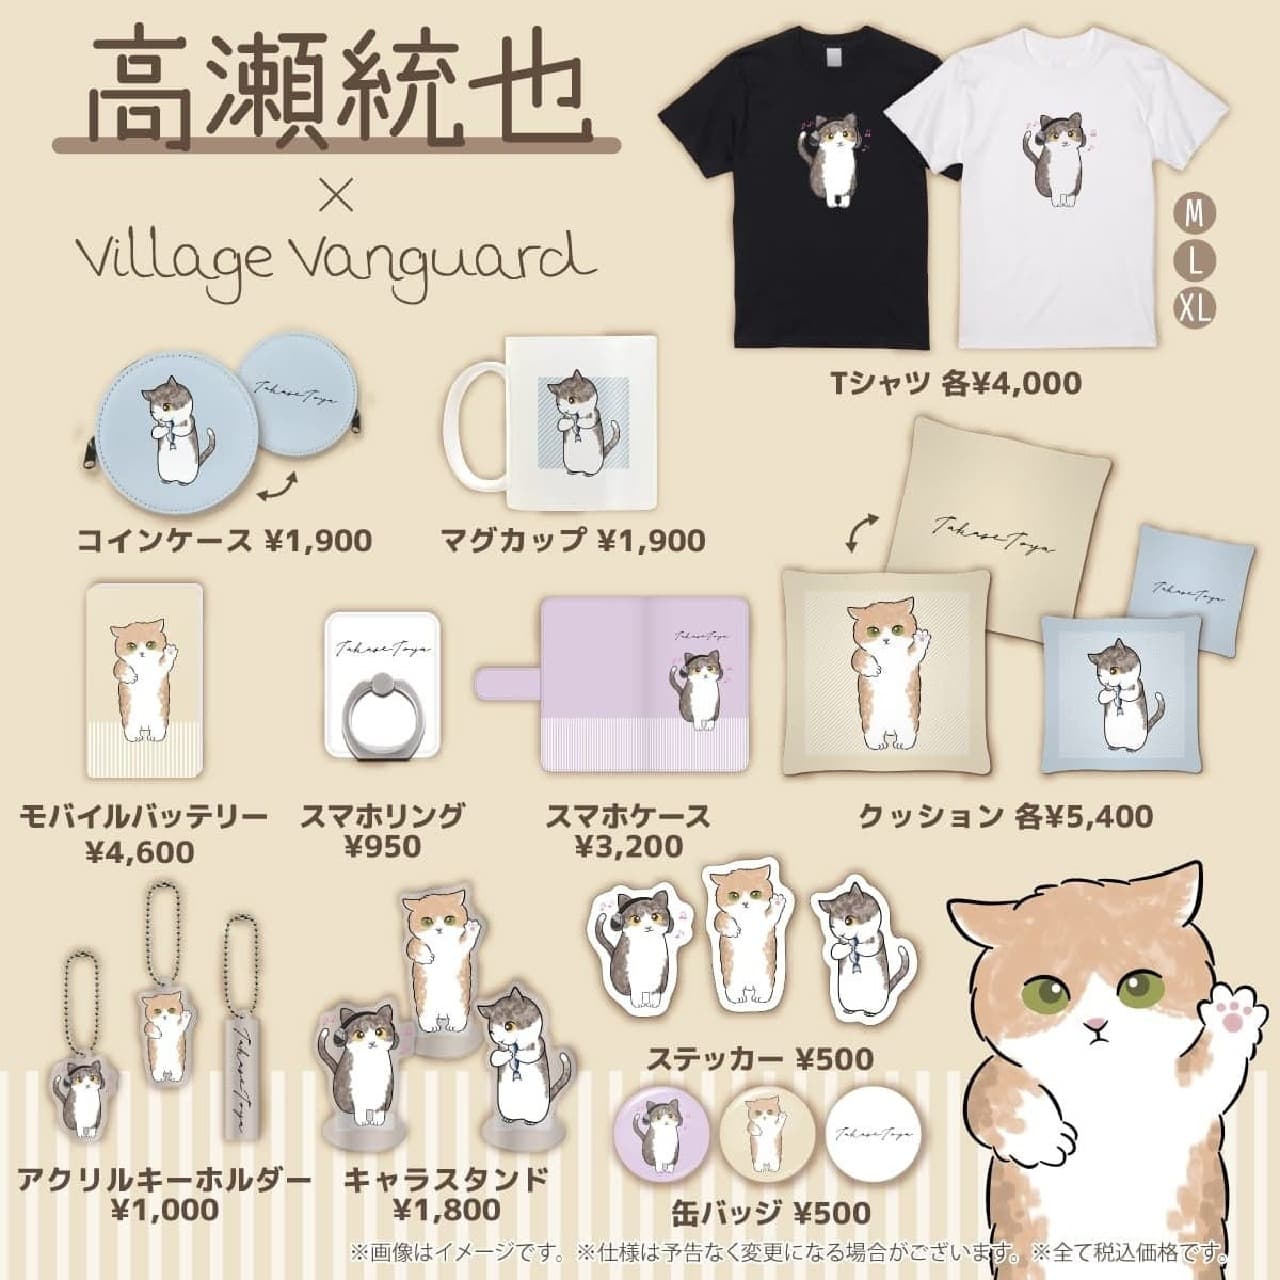 Village Vanguard and Tsunoya Takase collaborate to create limited-edition goods featuring their beloved cats Moppu and Nameru! Limited-edition goods featuring the beloved cats Moppu and Nameru will be available for order from May 2.